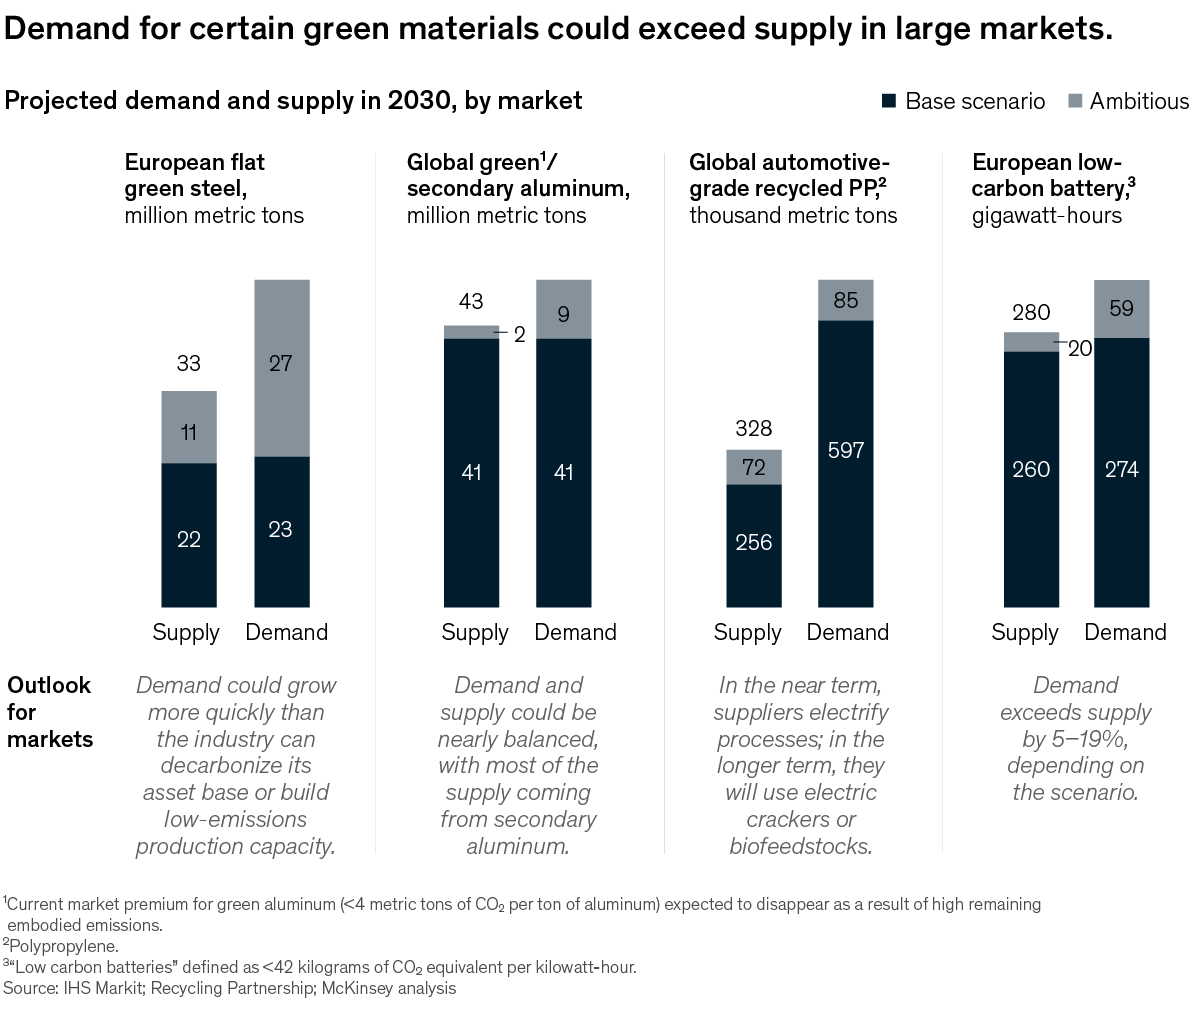 Chart of projected 2030 demand and supply of certain green materials